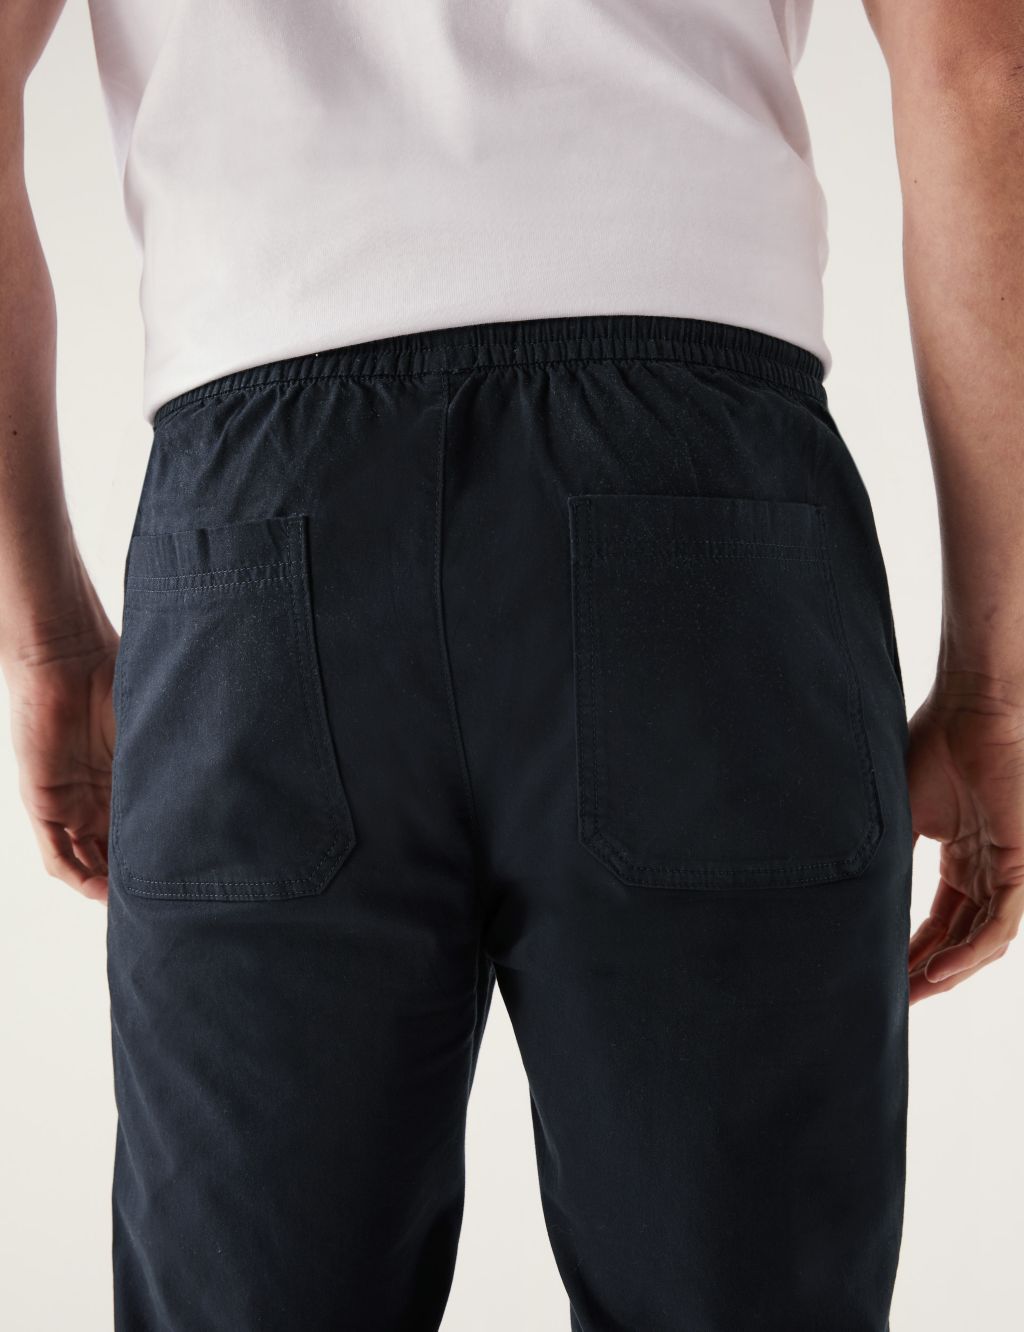 Tapered Fit Elasticated Waist Trousers image 5